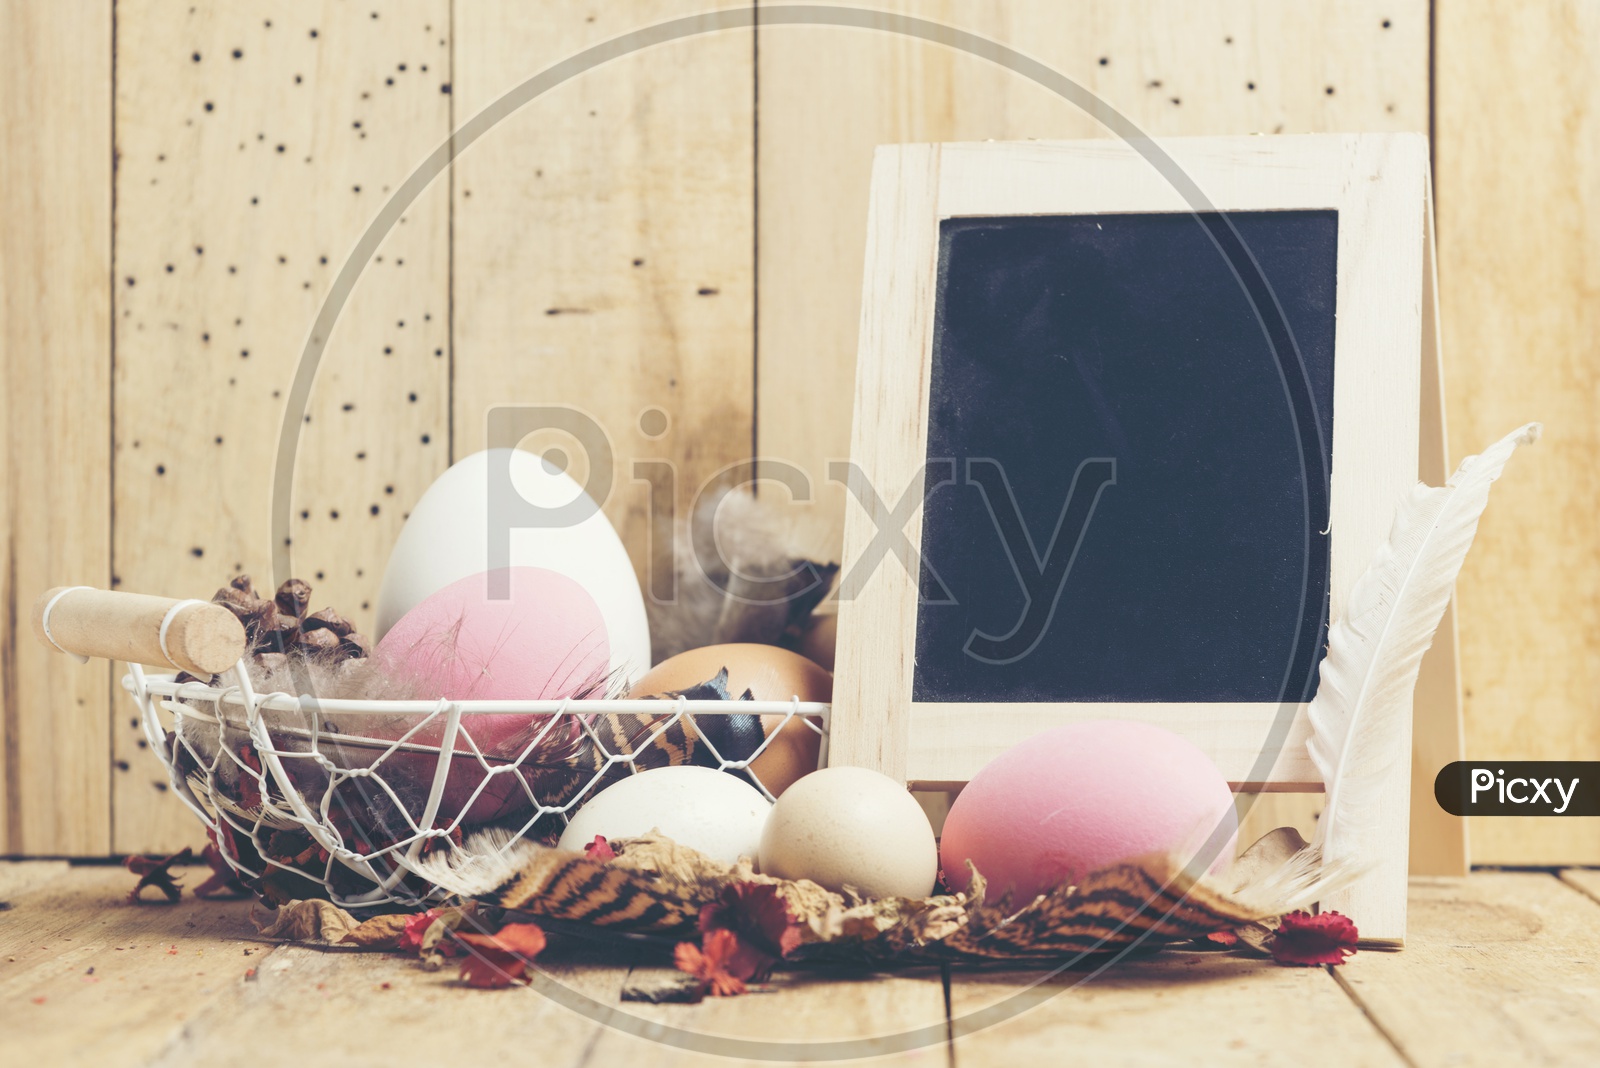 Cute creative photo with easter eggs, Ester background with colorful easter eggs, vintage filter image